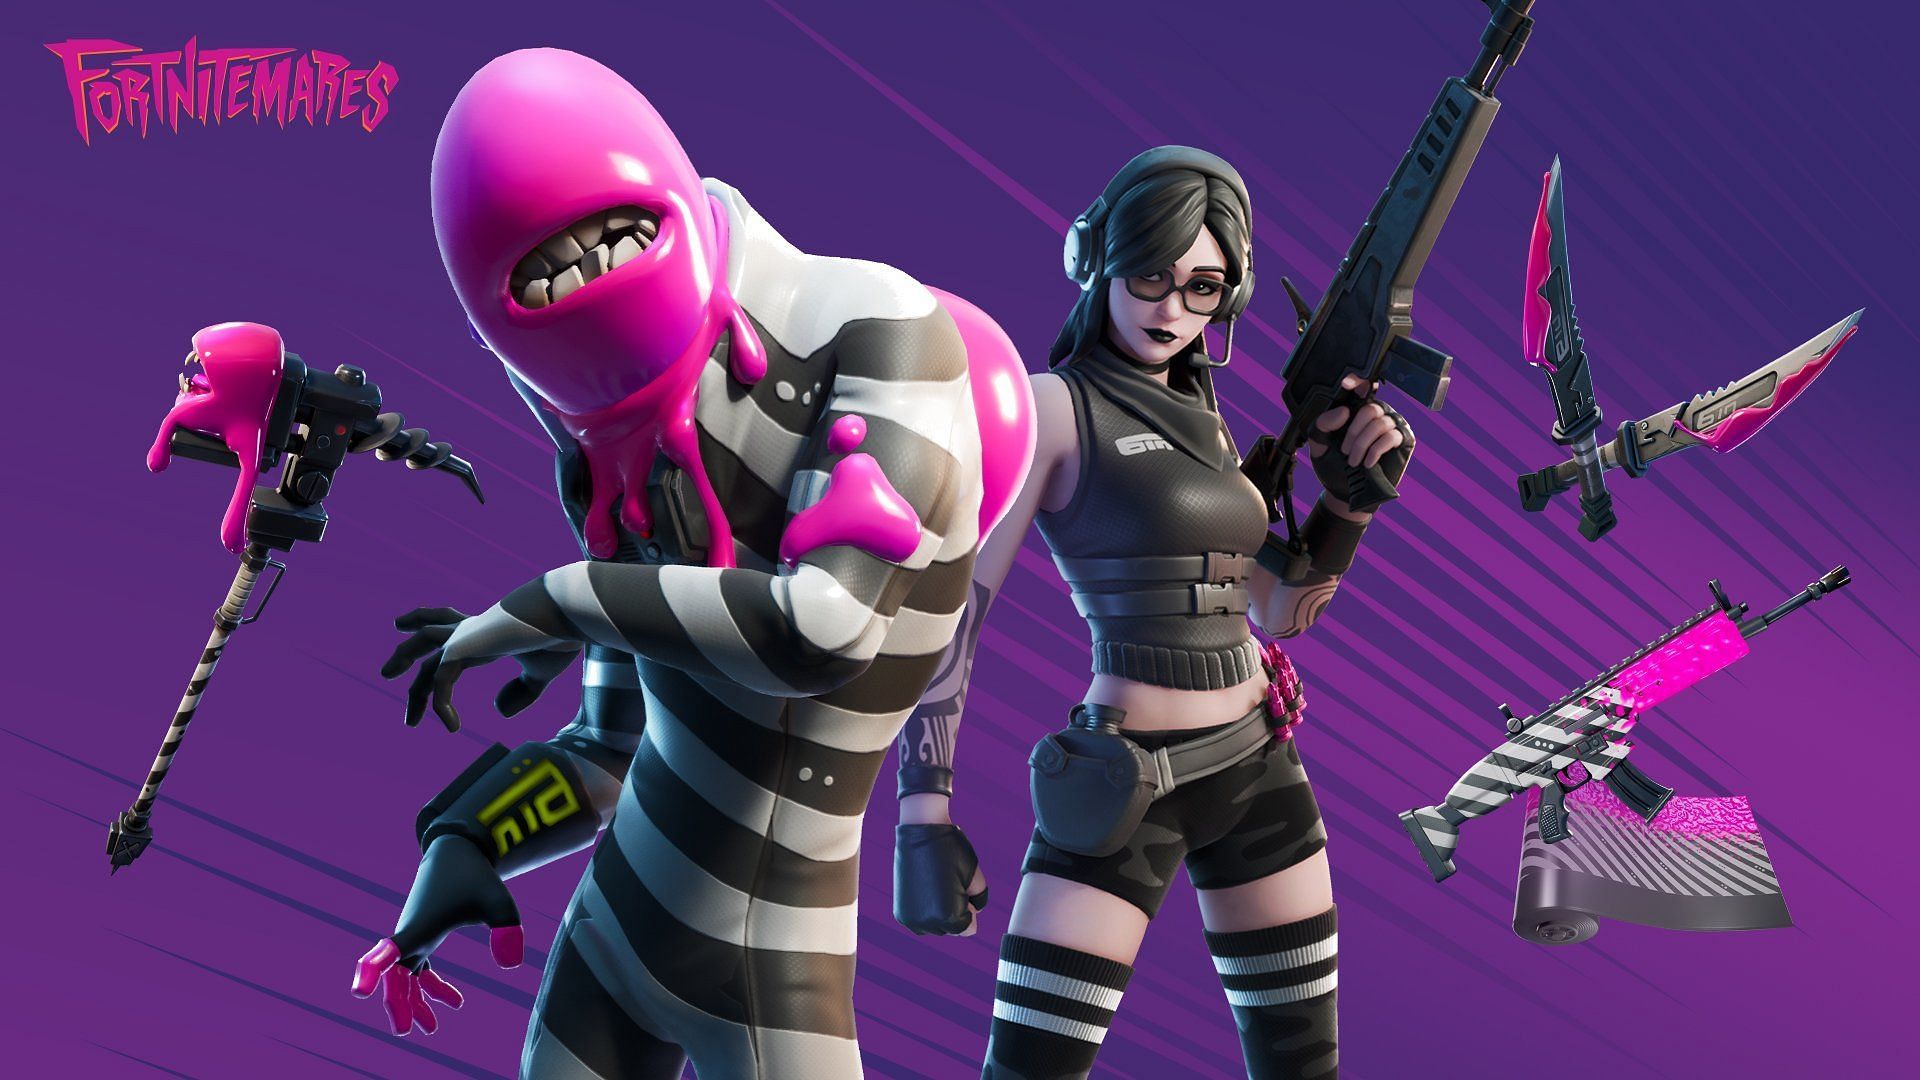 A promotional image for the set that includes Teef (Image via Epic Games)